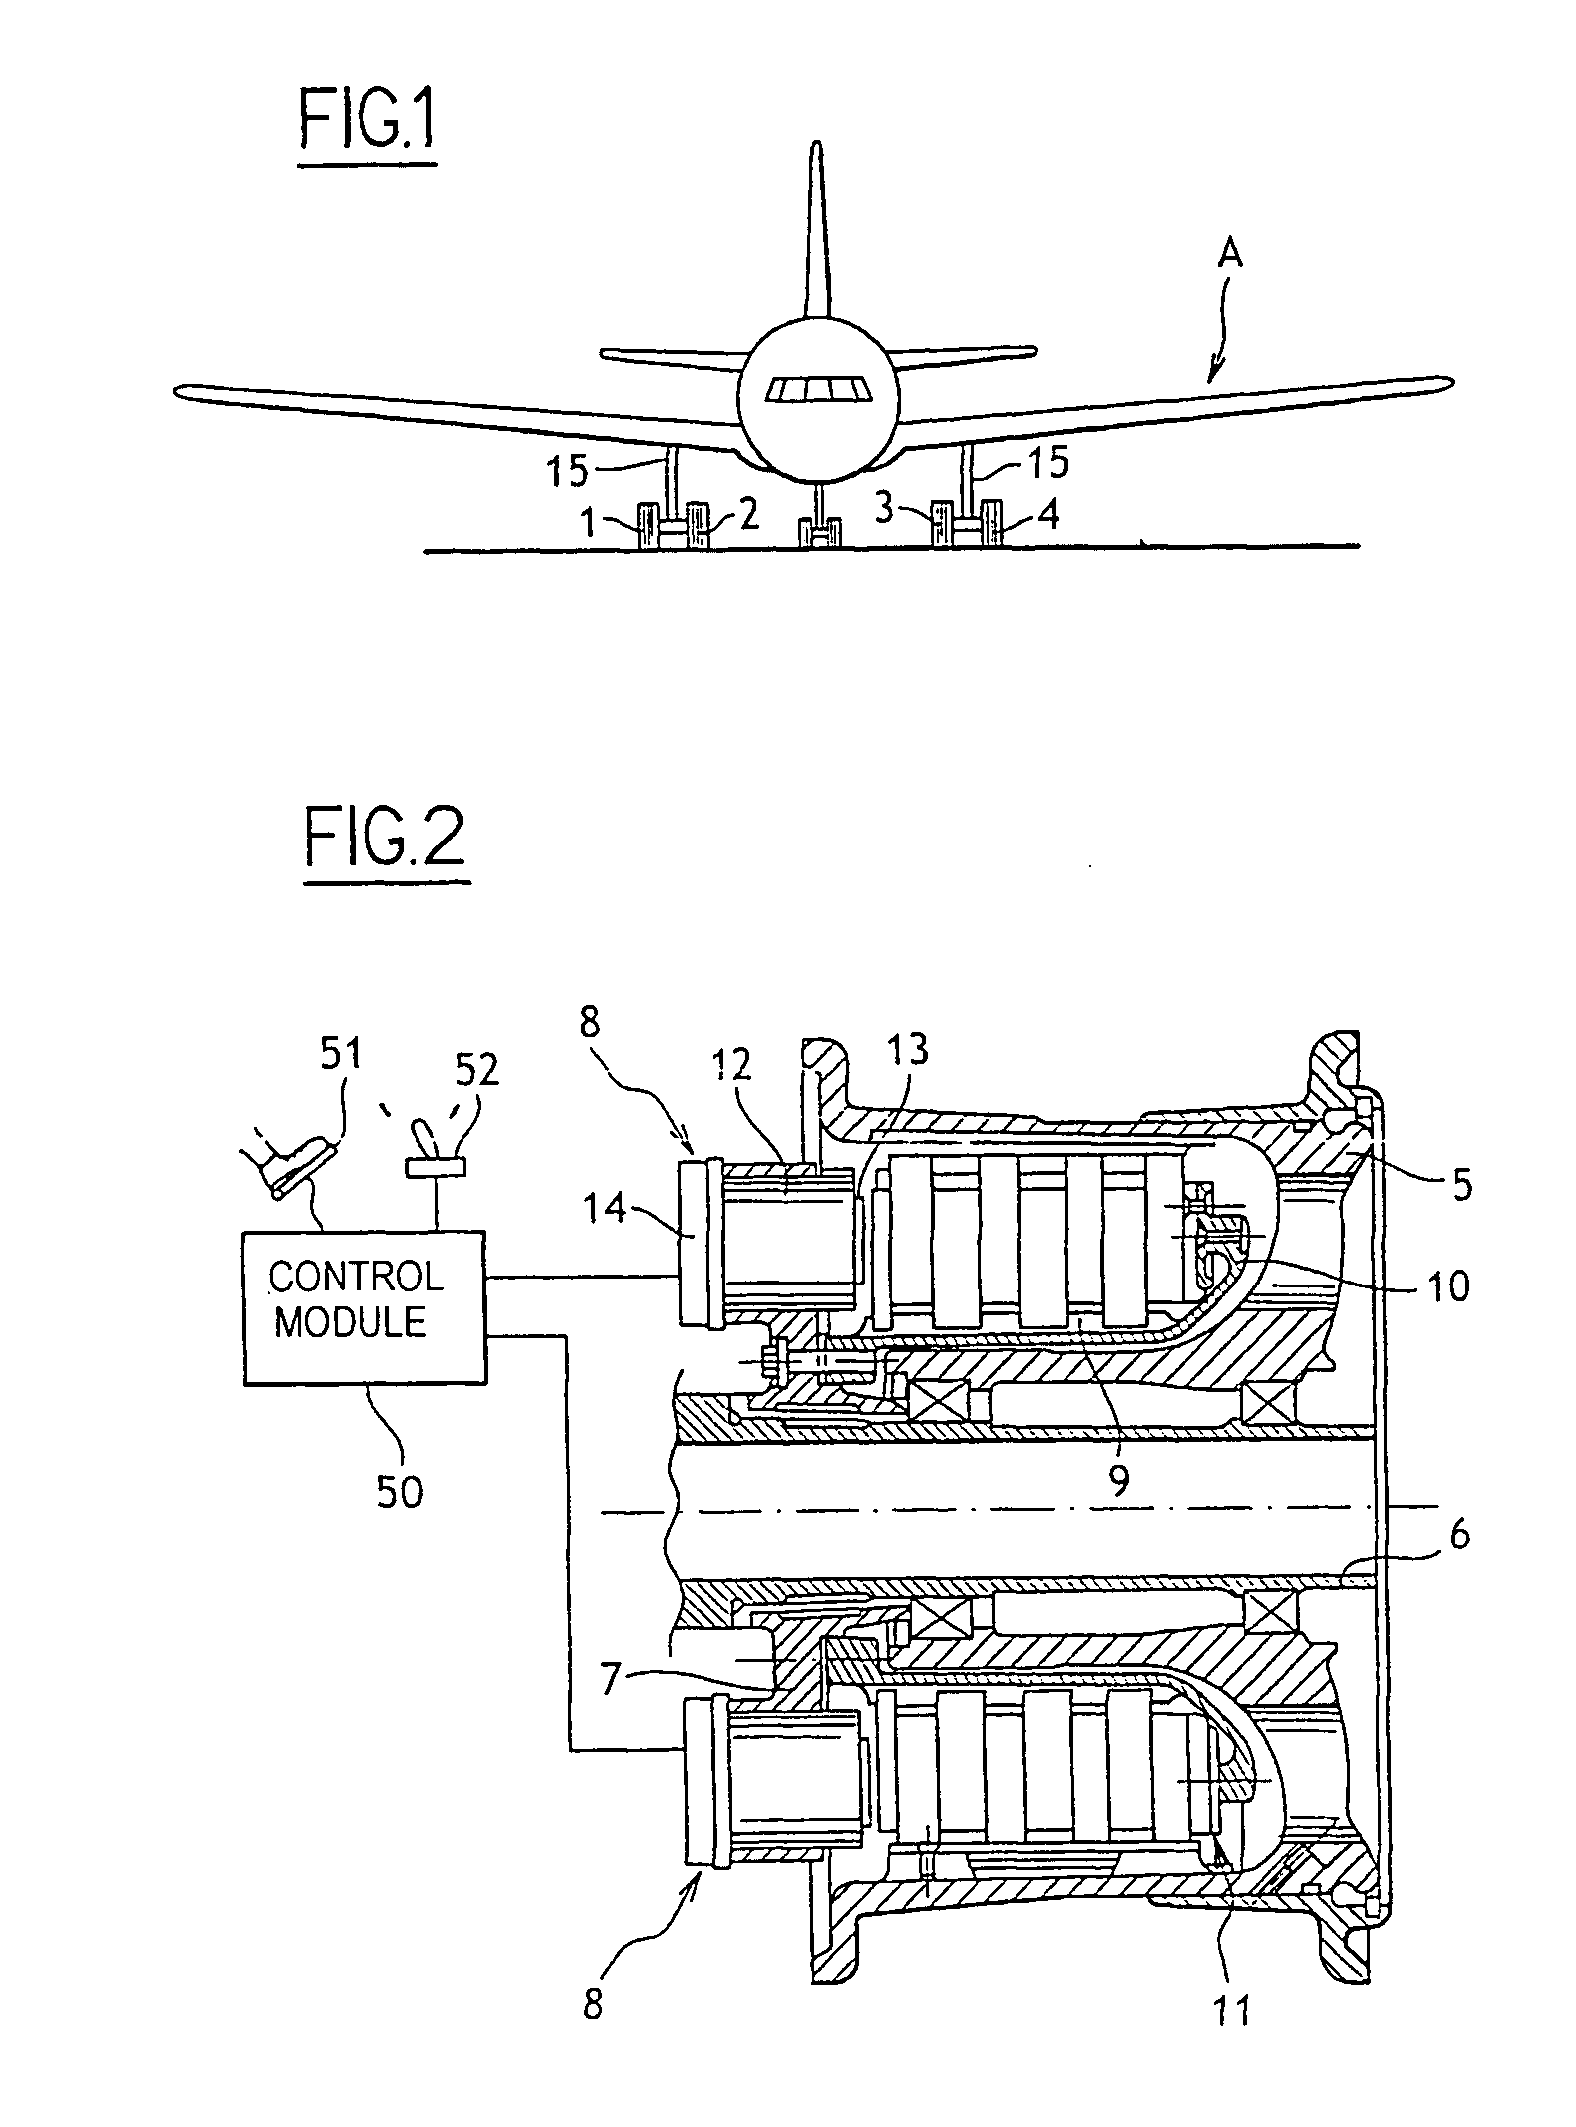 Protection method in a vehicle brake system having electric brakes